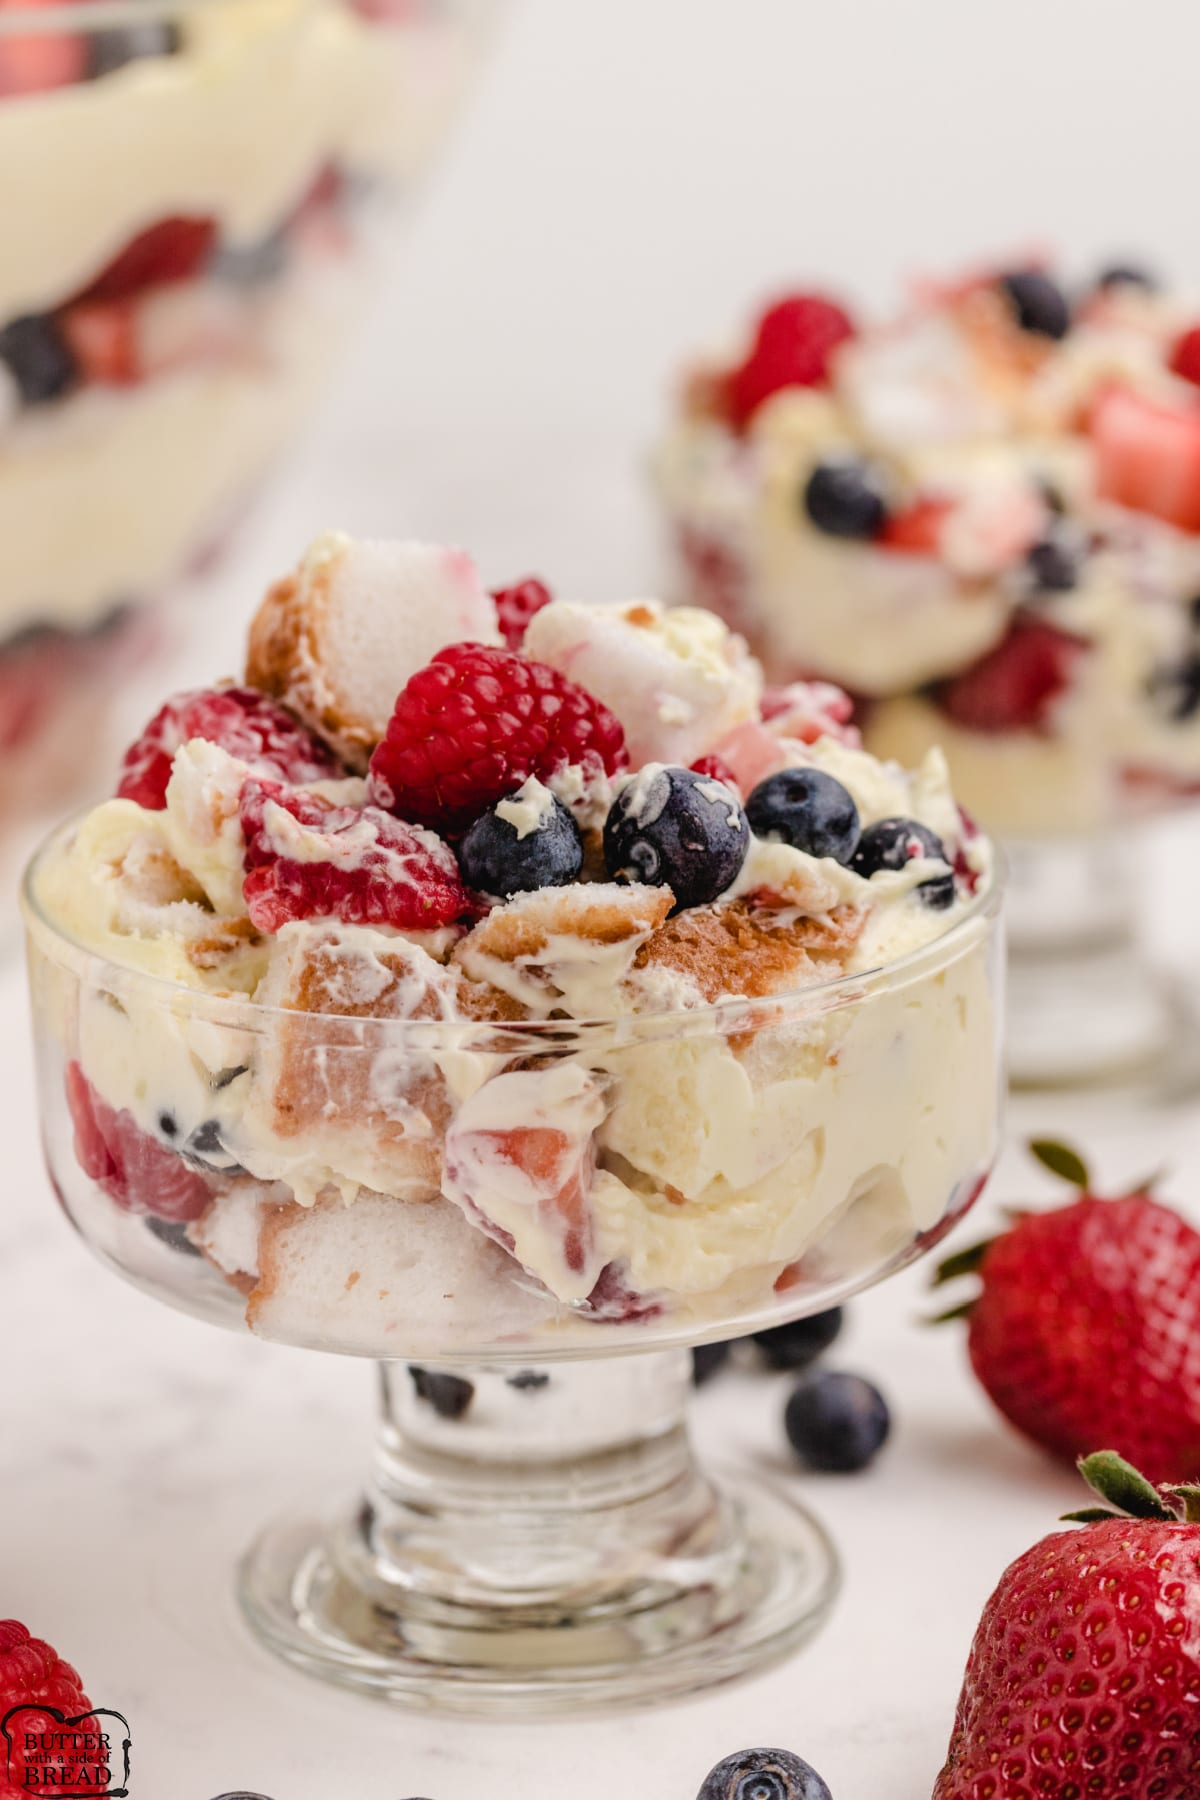 Trifle made with vanilla pudding, whipped cream and three kinds of berries